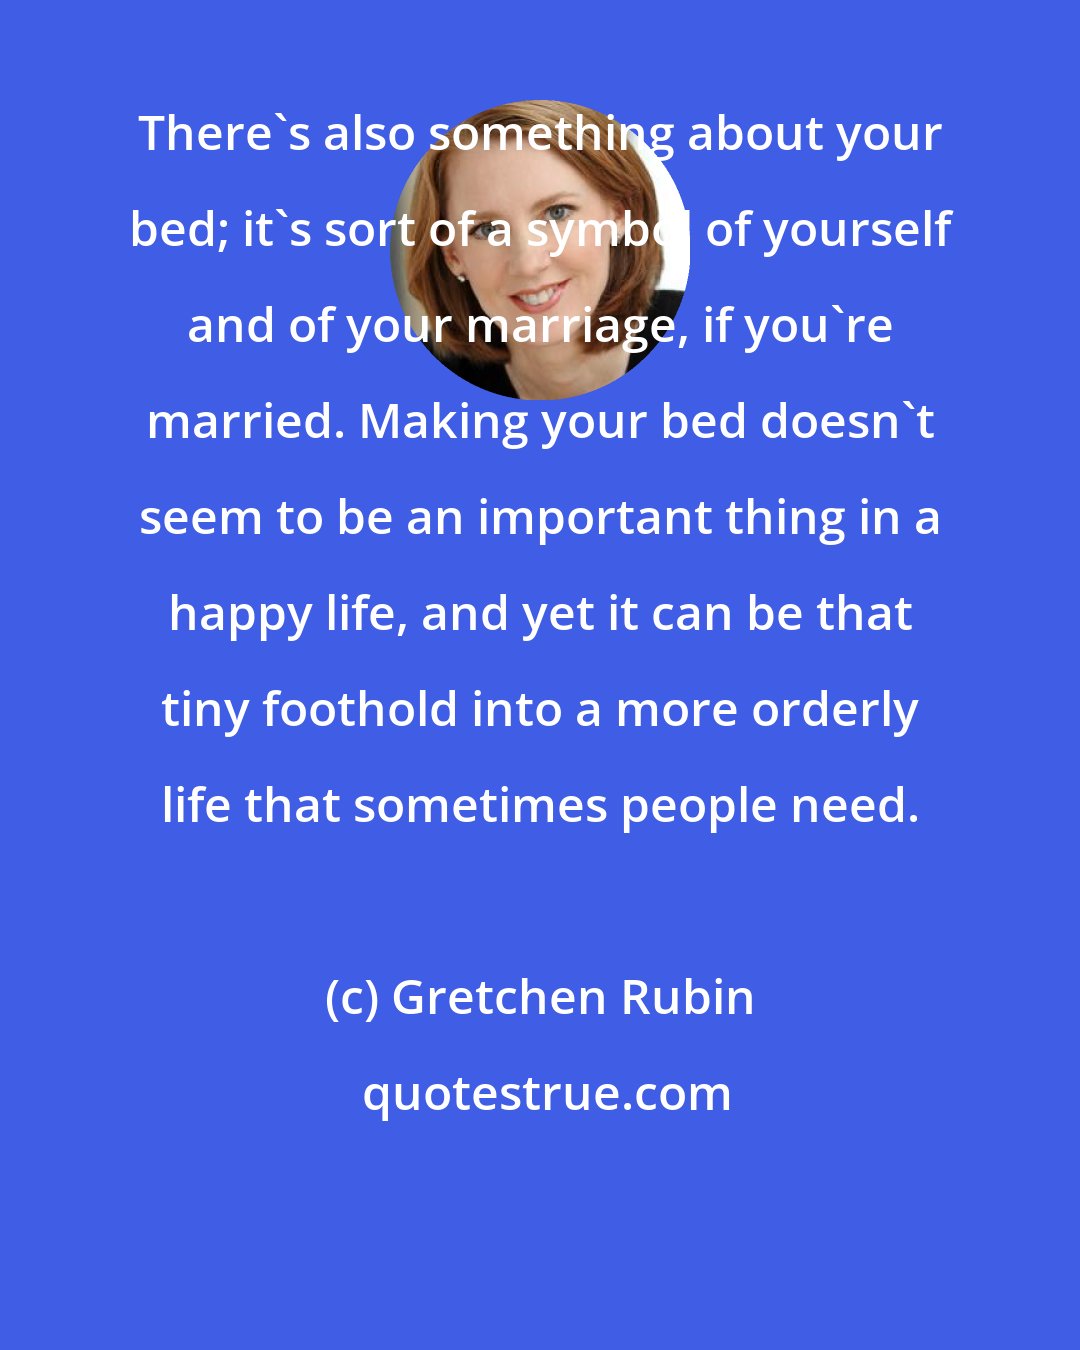 Gretchen Rubin: There's also something about your bed; it's sort of a symbol of yourself and of your marriage, if you're married. Making your bed doesn't seem to be an important thing in a happy life, and yet it can be that tiny foothold into a more orderly life that sometimes people need.